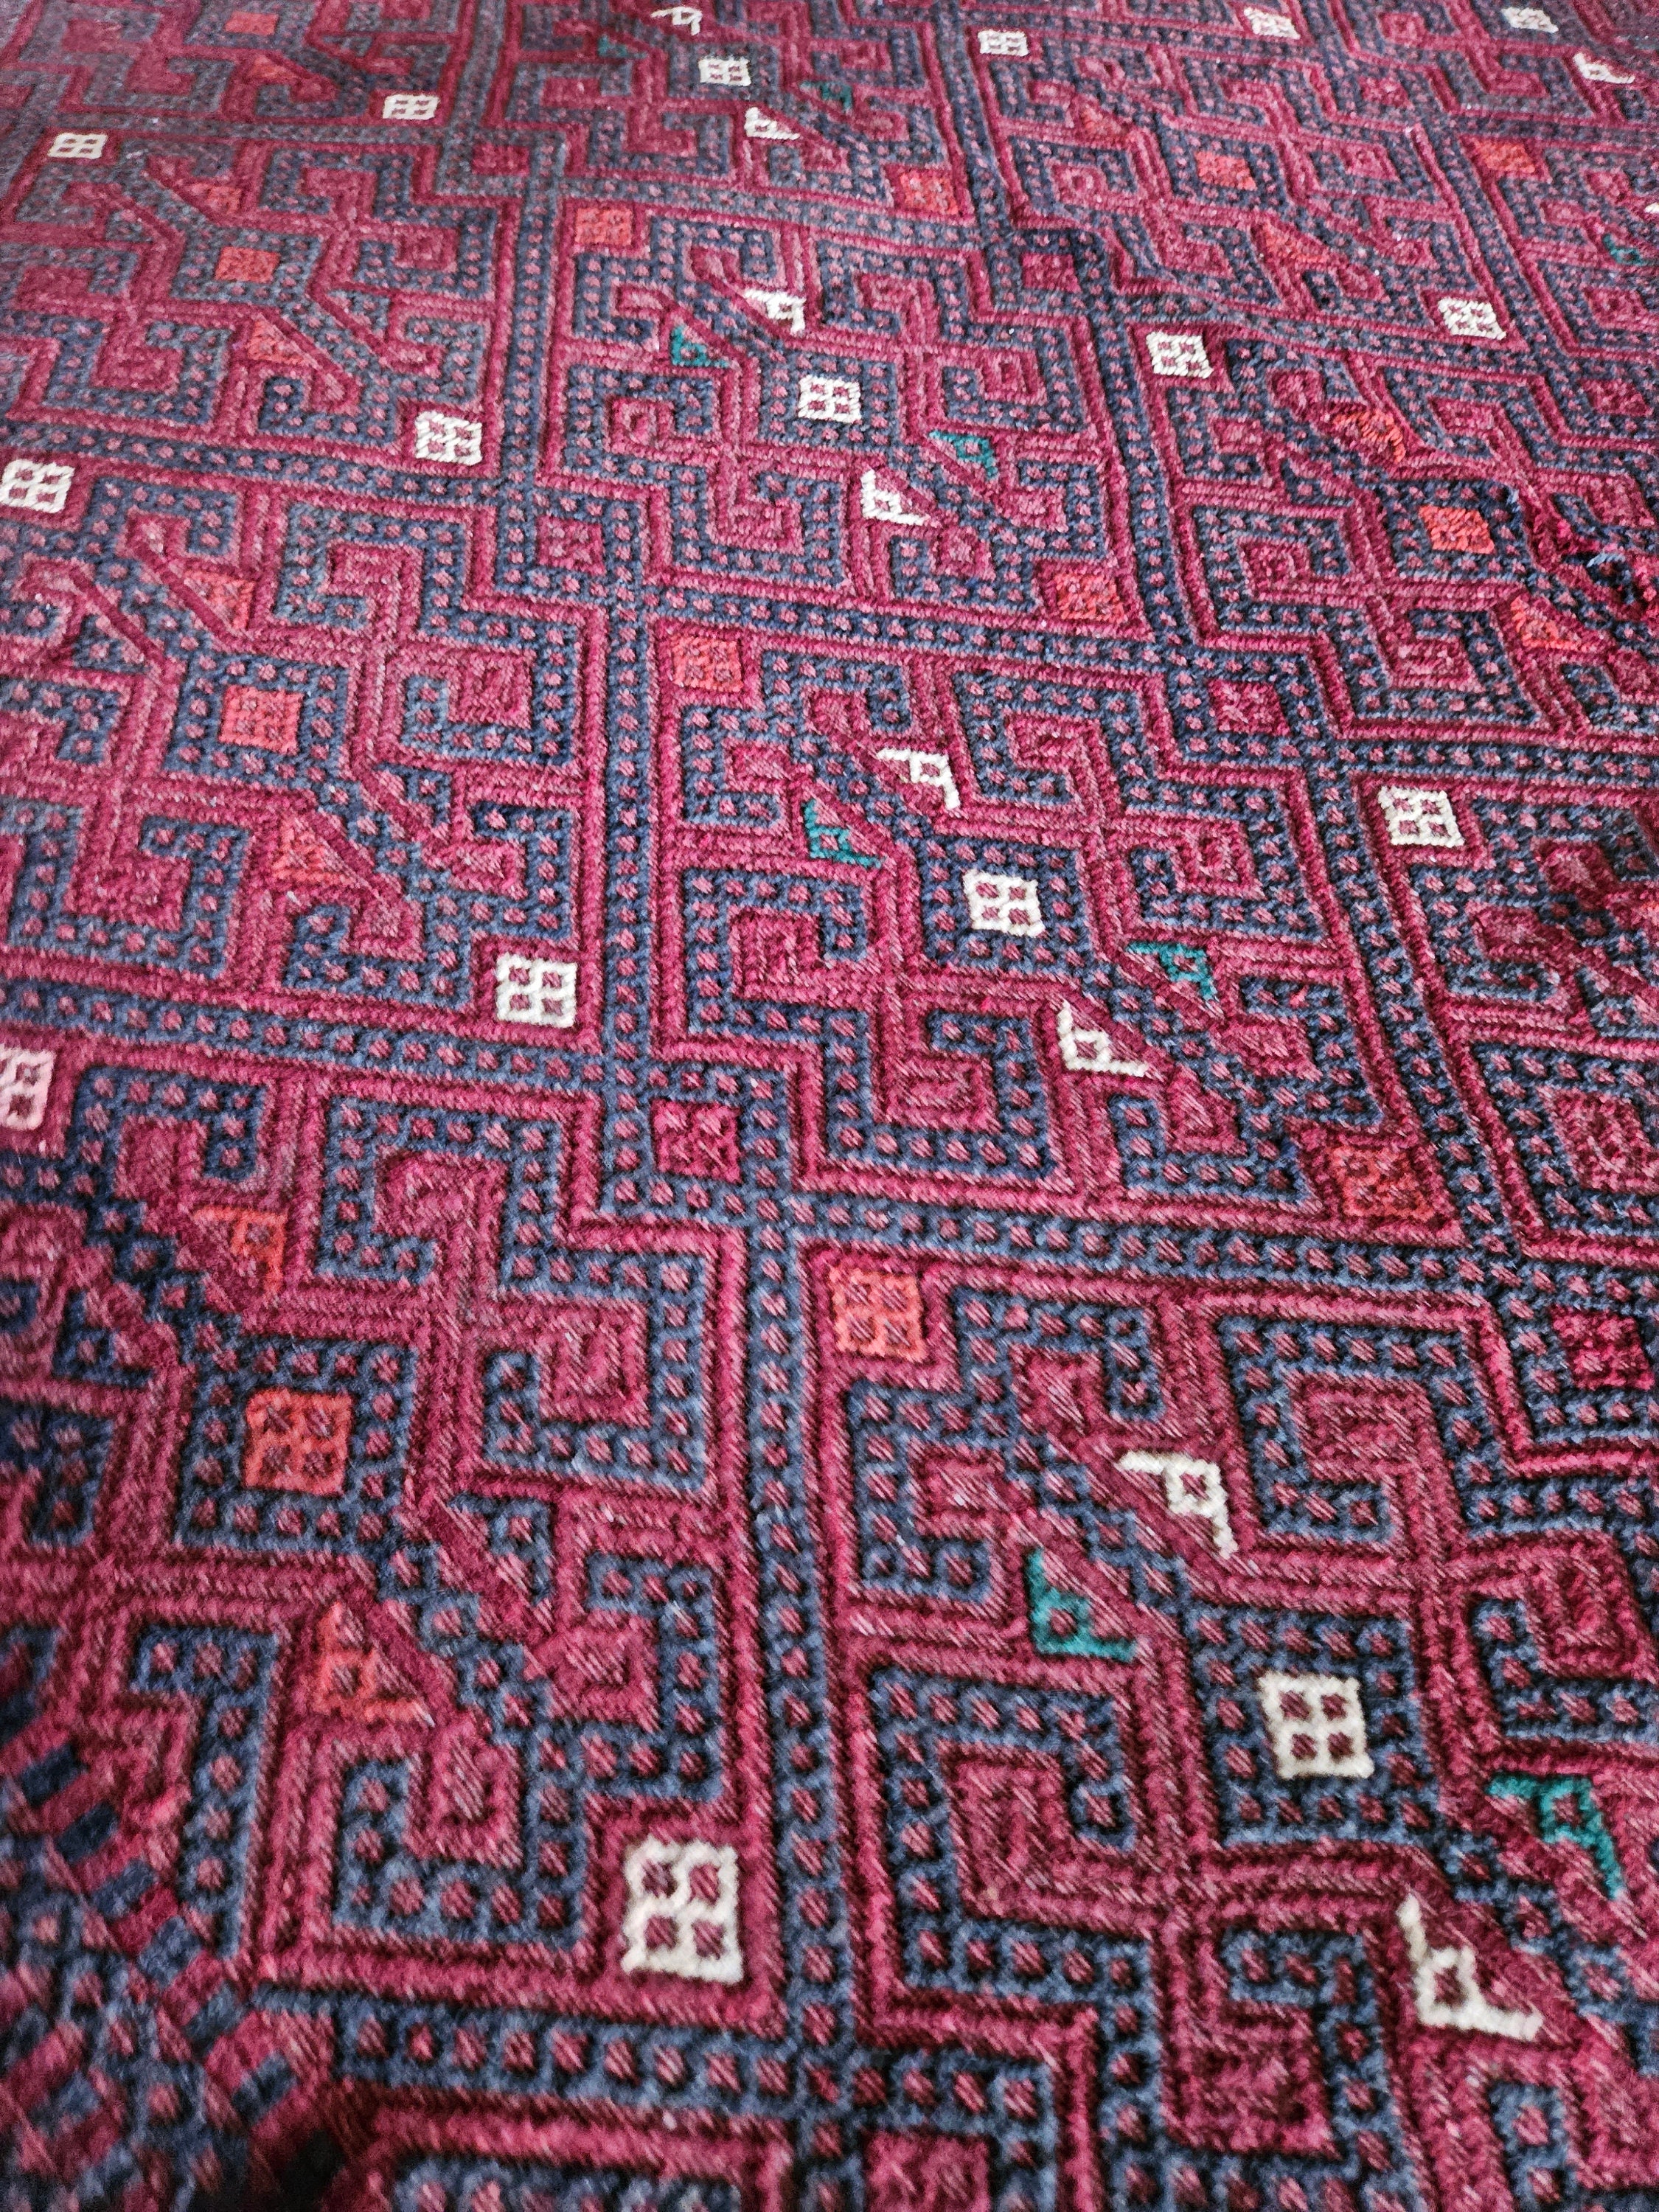 Brand new well-made Sumac Red Afghan hand-woven kilim rug, Area interior rug, Floor Red, Living room size rug, Traditional Wool Red Rug